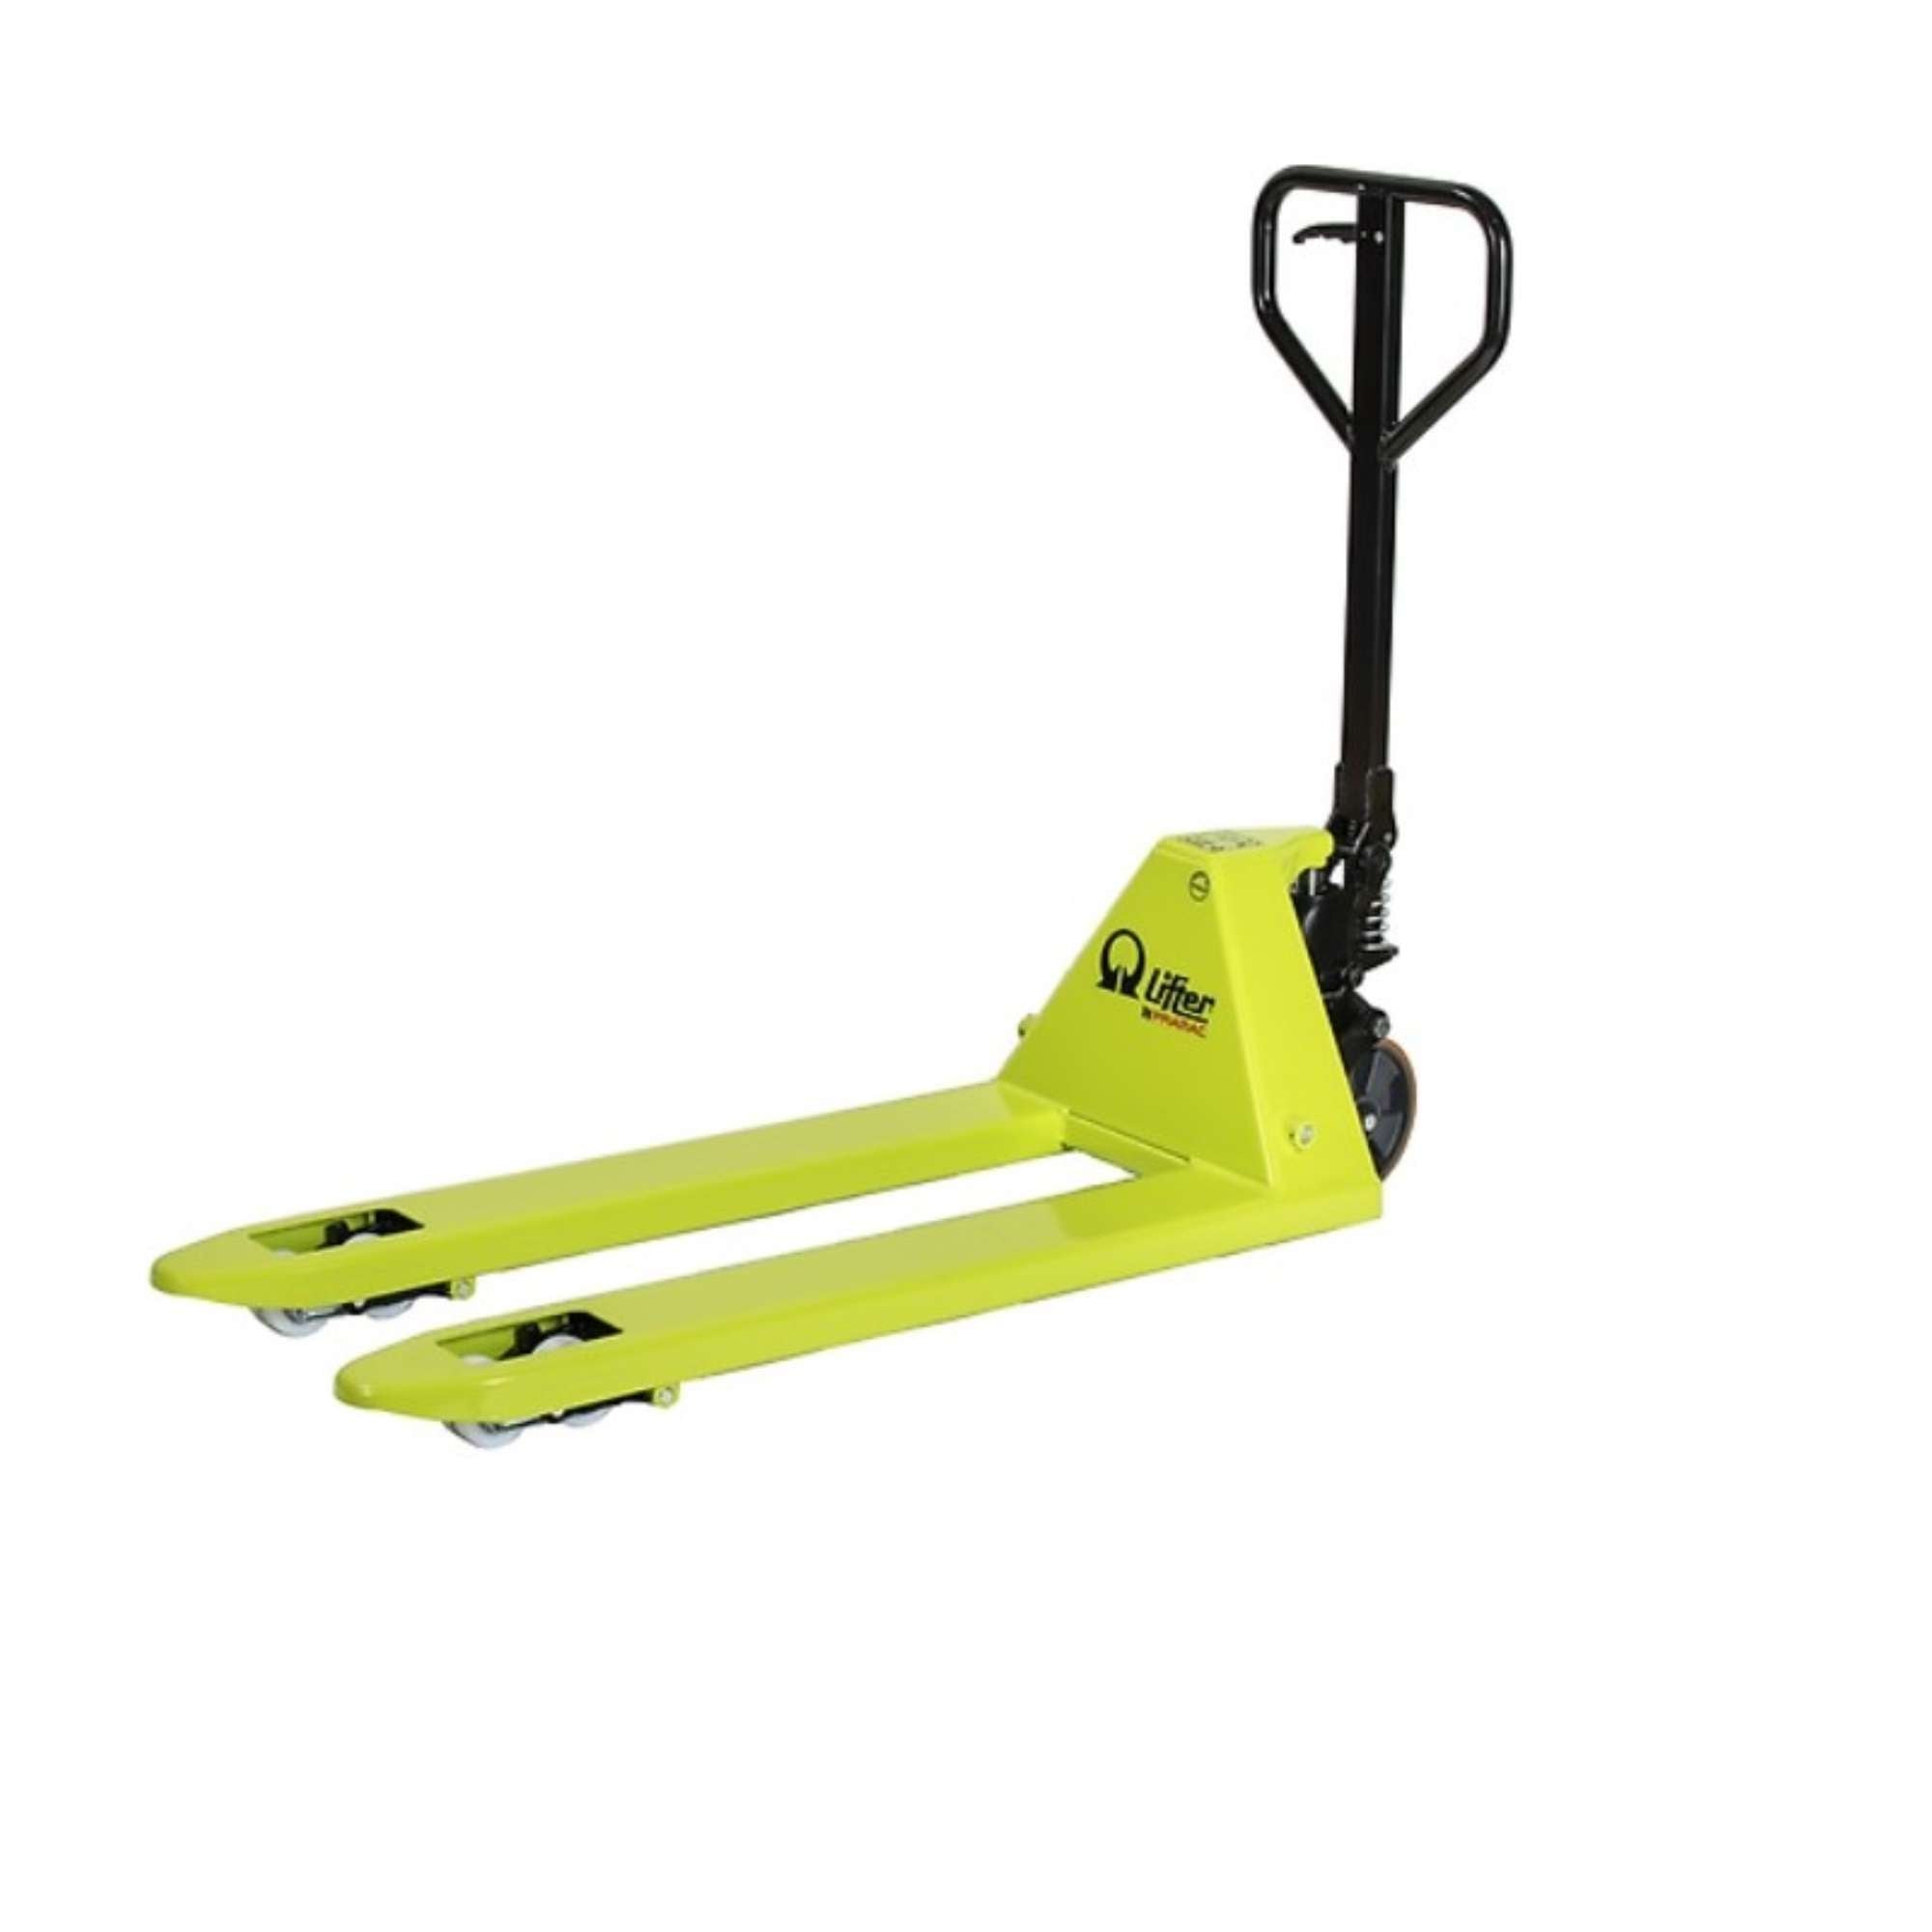 Hand pallet truck with capacity up to 2500 kg 1150x525 - Pramac GS25S4